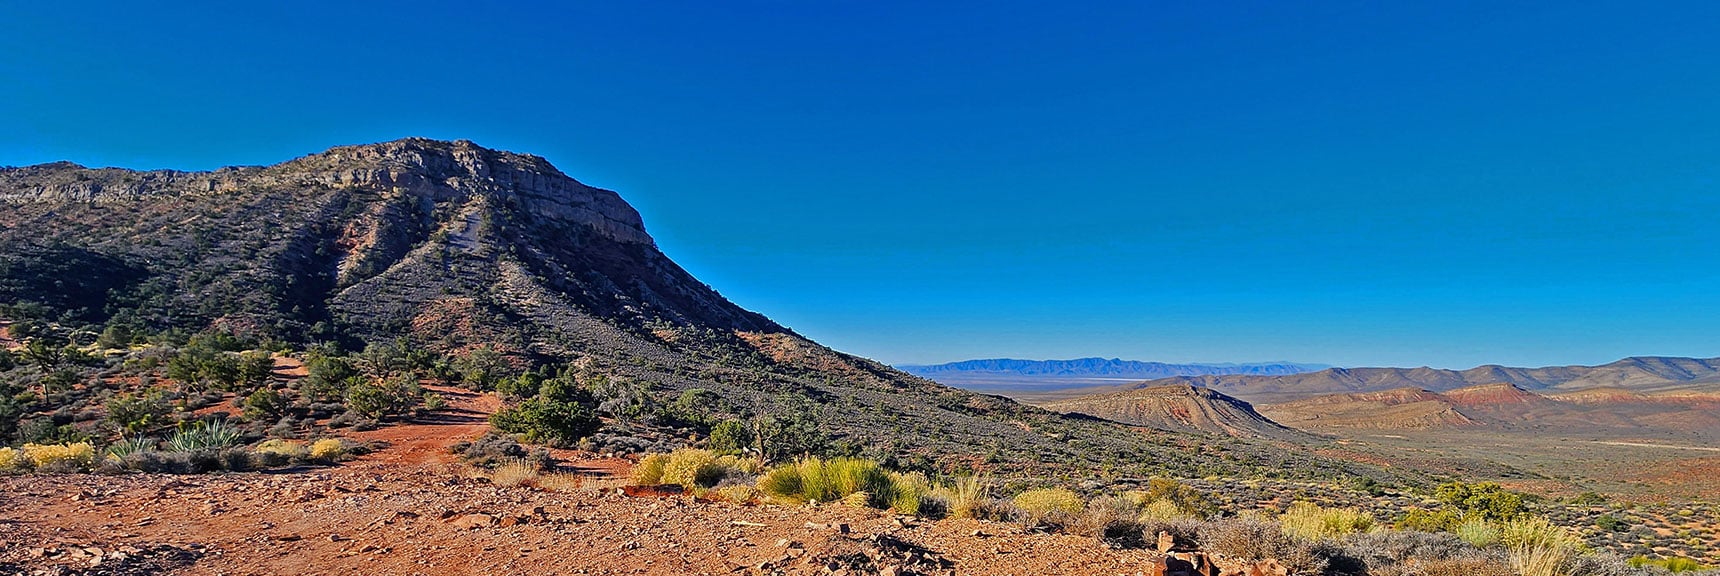 Imagine Camping at This Site on the Northeast Edge of Landmark Bluff! | Landmark Bluff Circuit | Lovell Canyon, Nevada